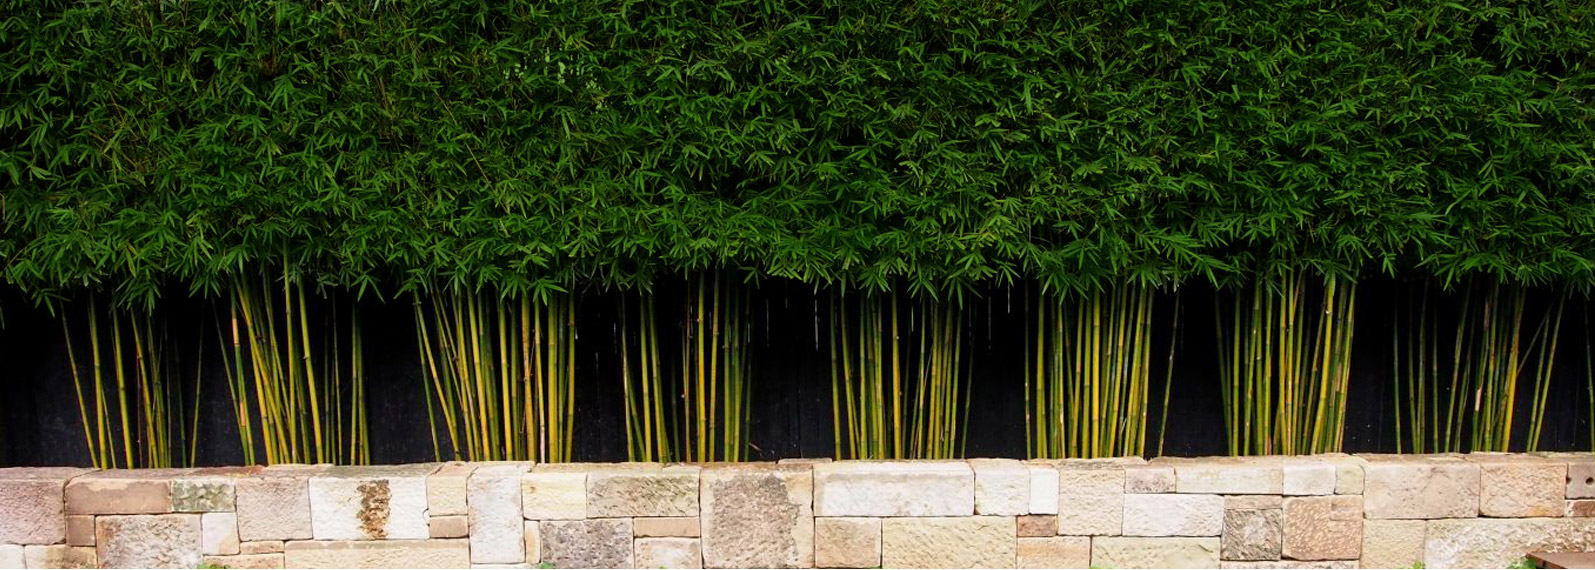 Wholesale Bamboo Plants For Sale In Sydney & Brisbane | BambooMan